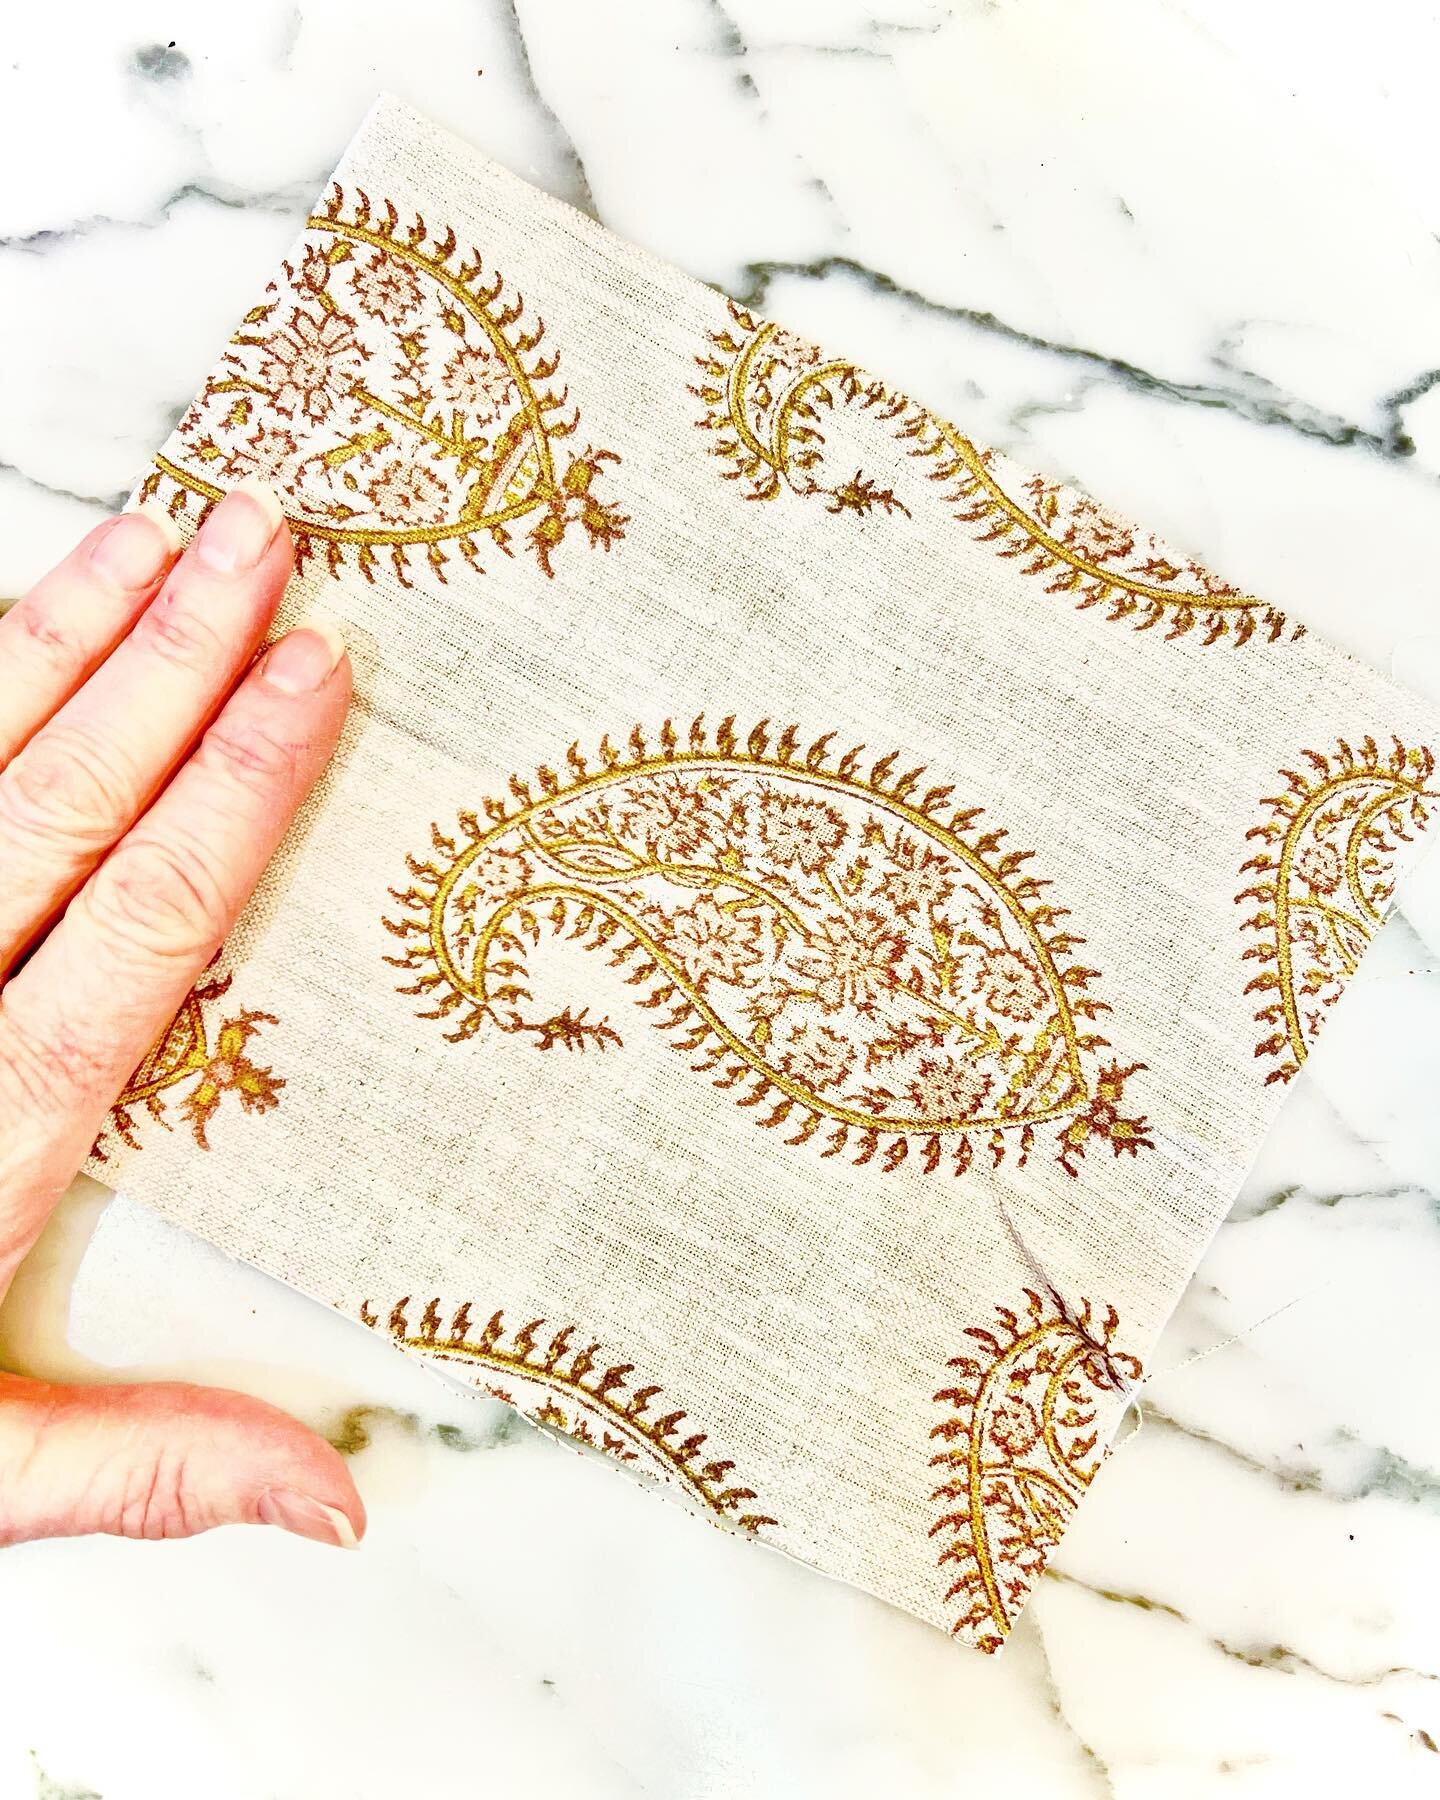 Do we love @waltergtextiles ??? We would be crazy not too! This is the Paisley Linen and we are using it for #curtains in a favorite client #livingroom. Can&rsquo;t wait to see it installed!
.
.
.
.
.
.
#textiles 
#linen
#paisley
#windowcoverings 
#s